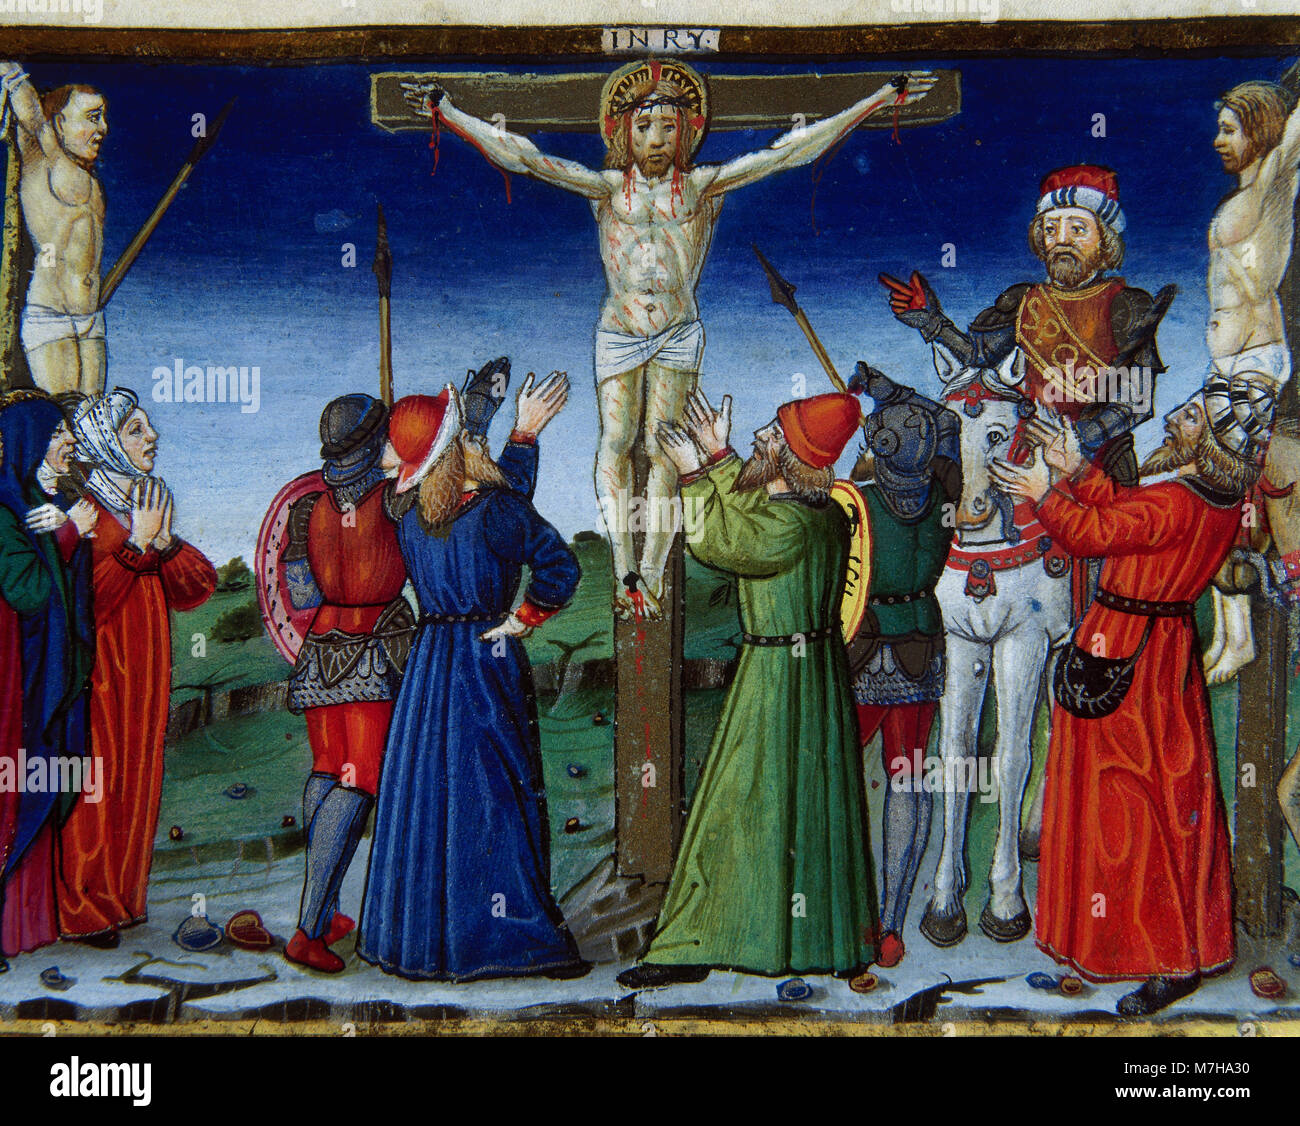 Jesus crucified is surrounded by a crowd of people crying on Mount Calvary. Codex of Predis, 1476. Royal Library. Turin. Italy. Stock Photo